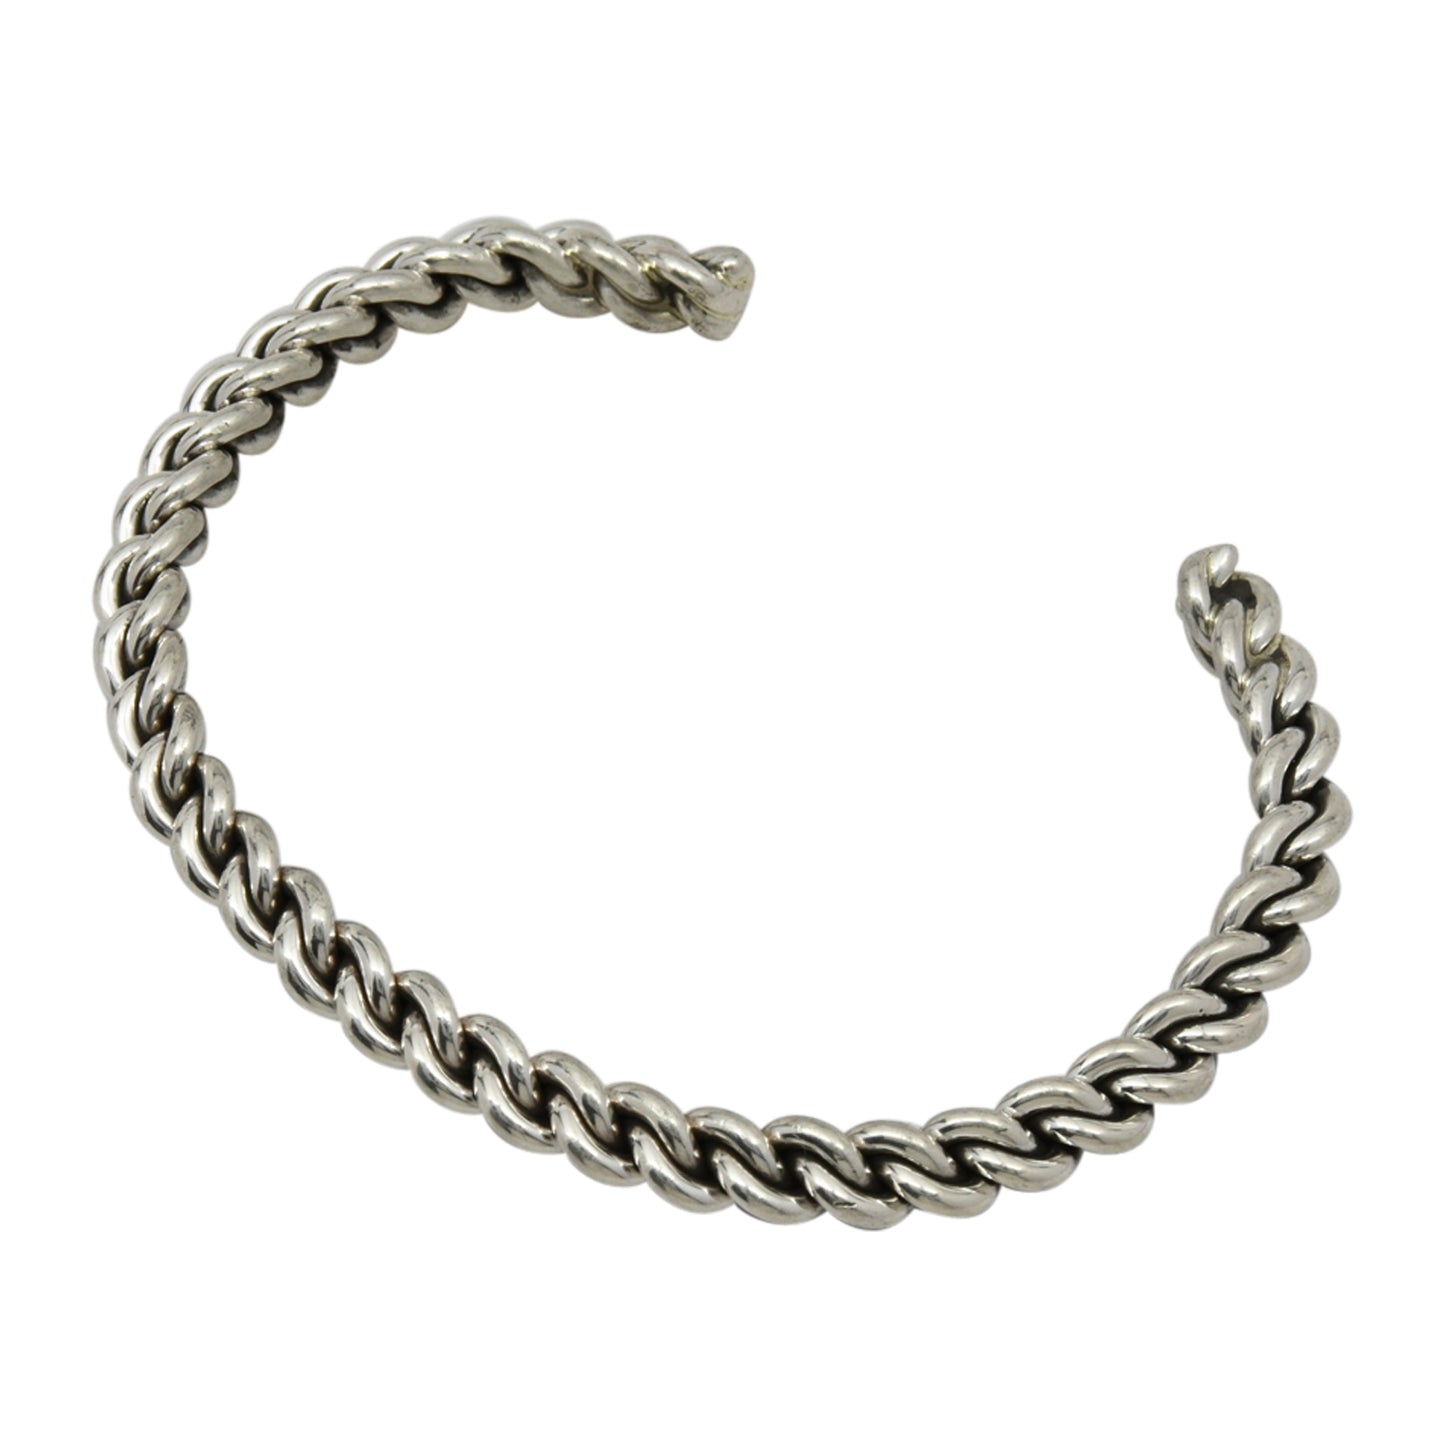 Elaine Tahe Sterling Silver Navajo Chain Link Style 5mm Cuff Bracelet